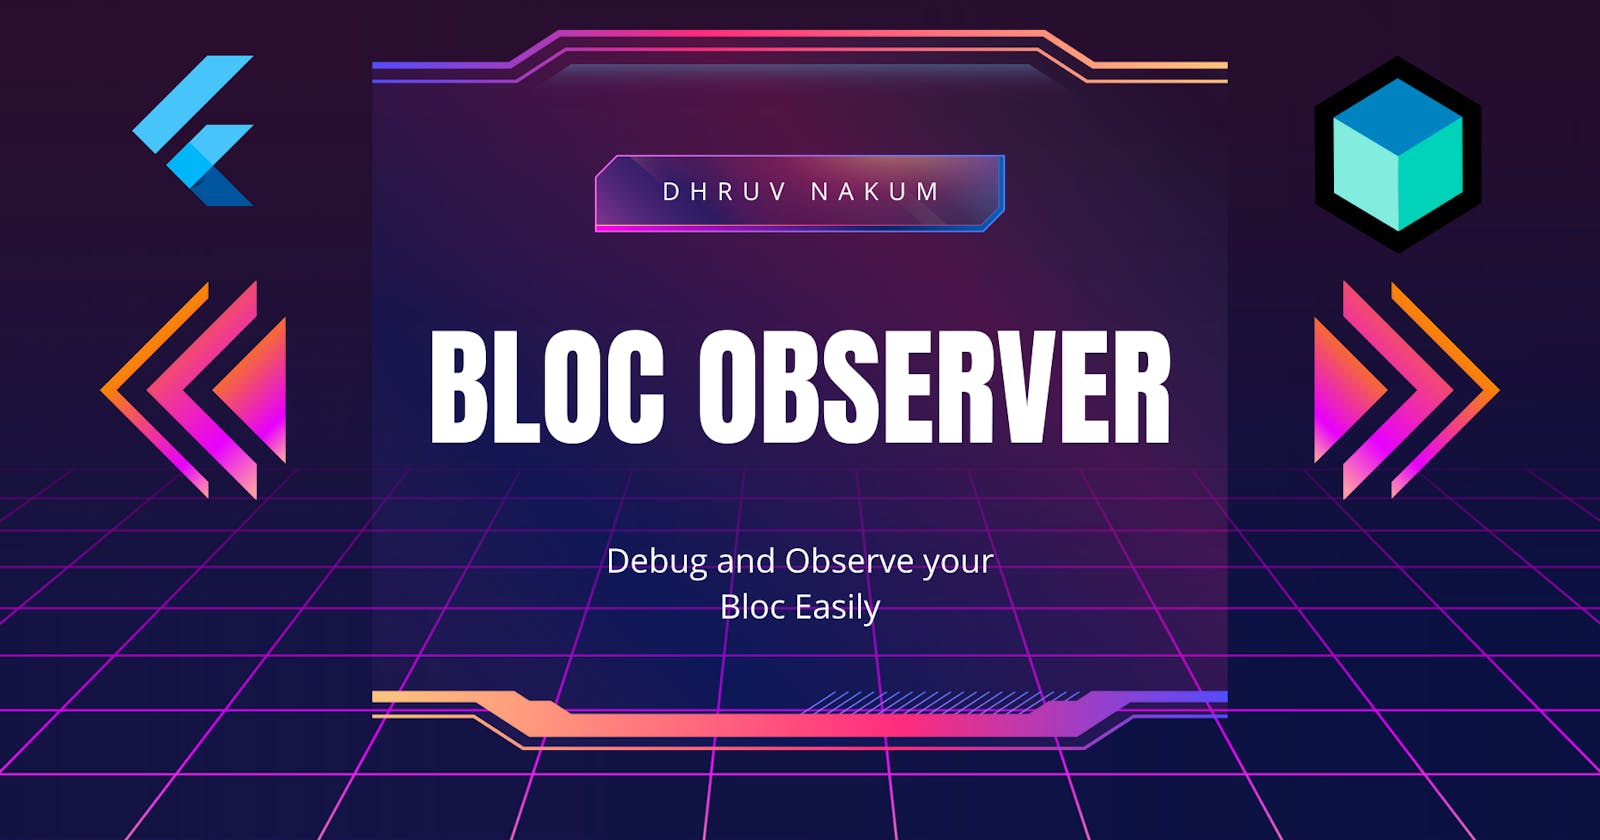 BlocObserver: Debug and Observe your Bloc Easily